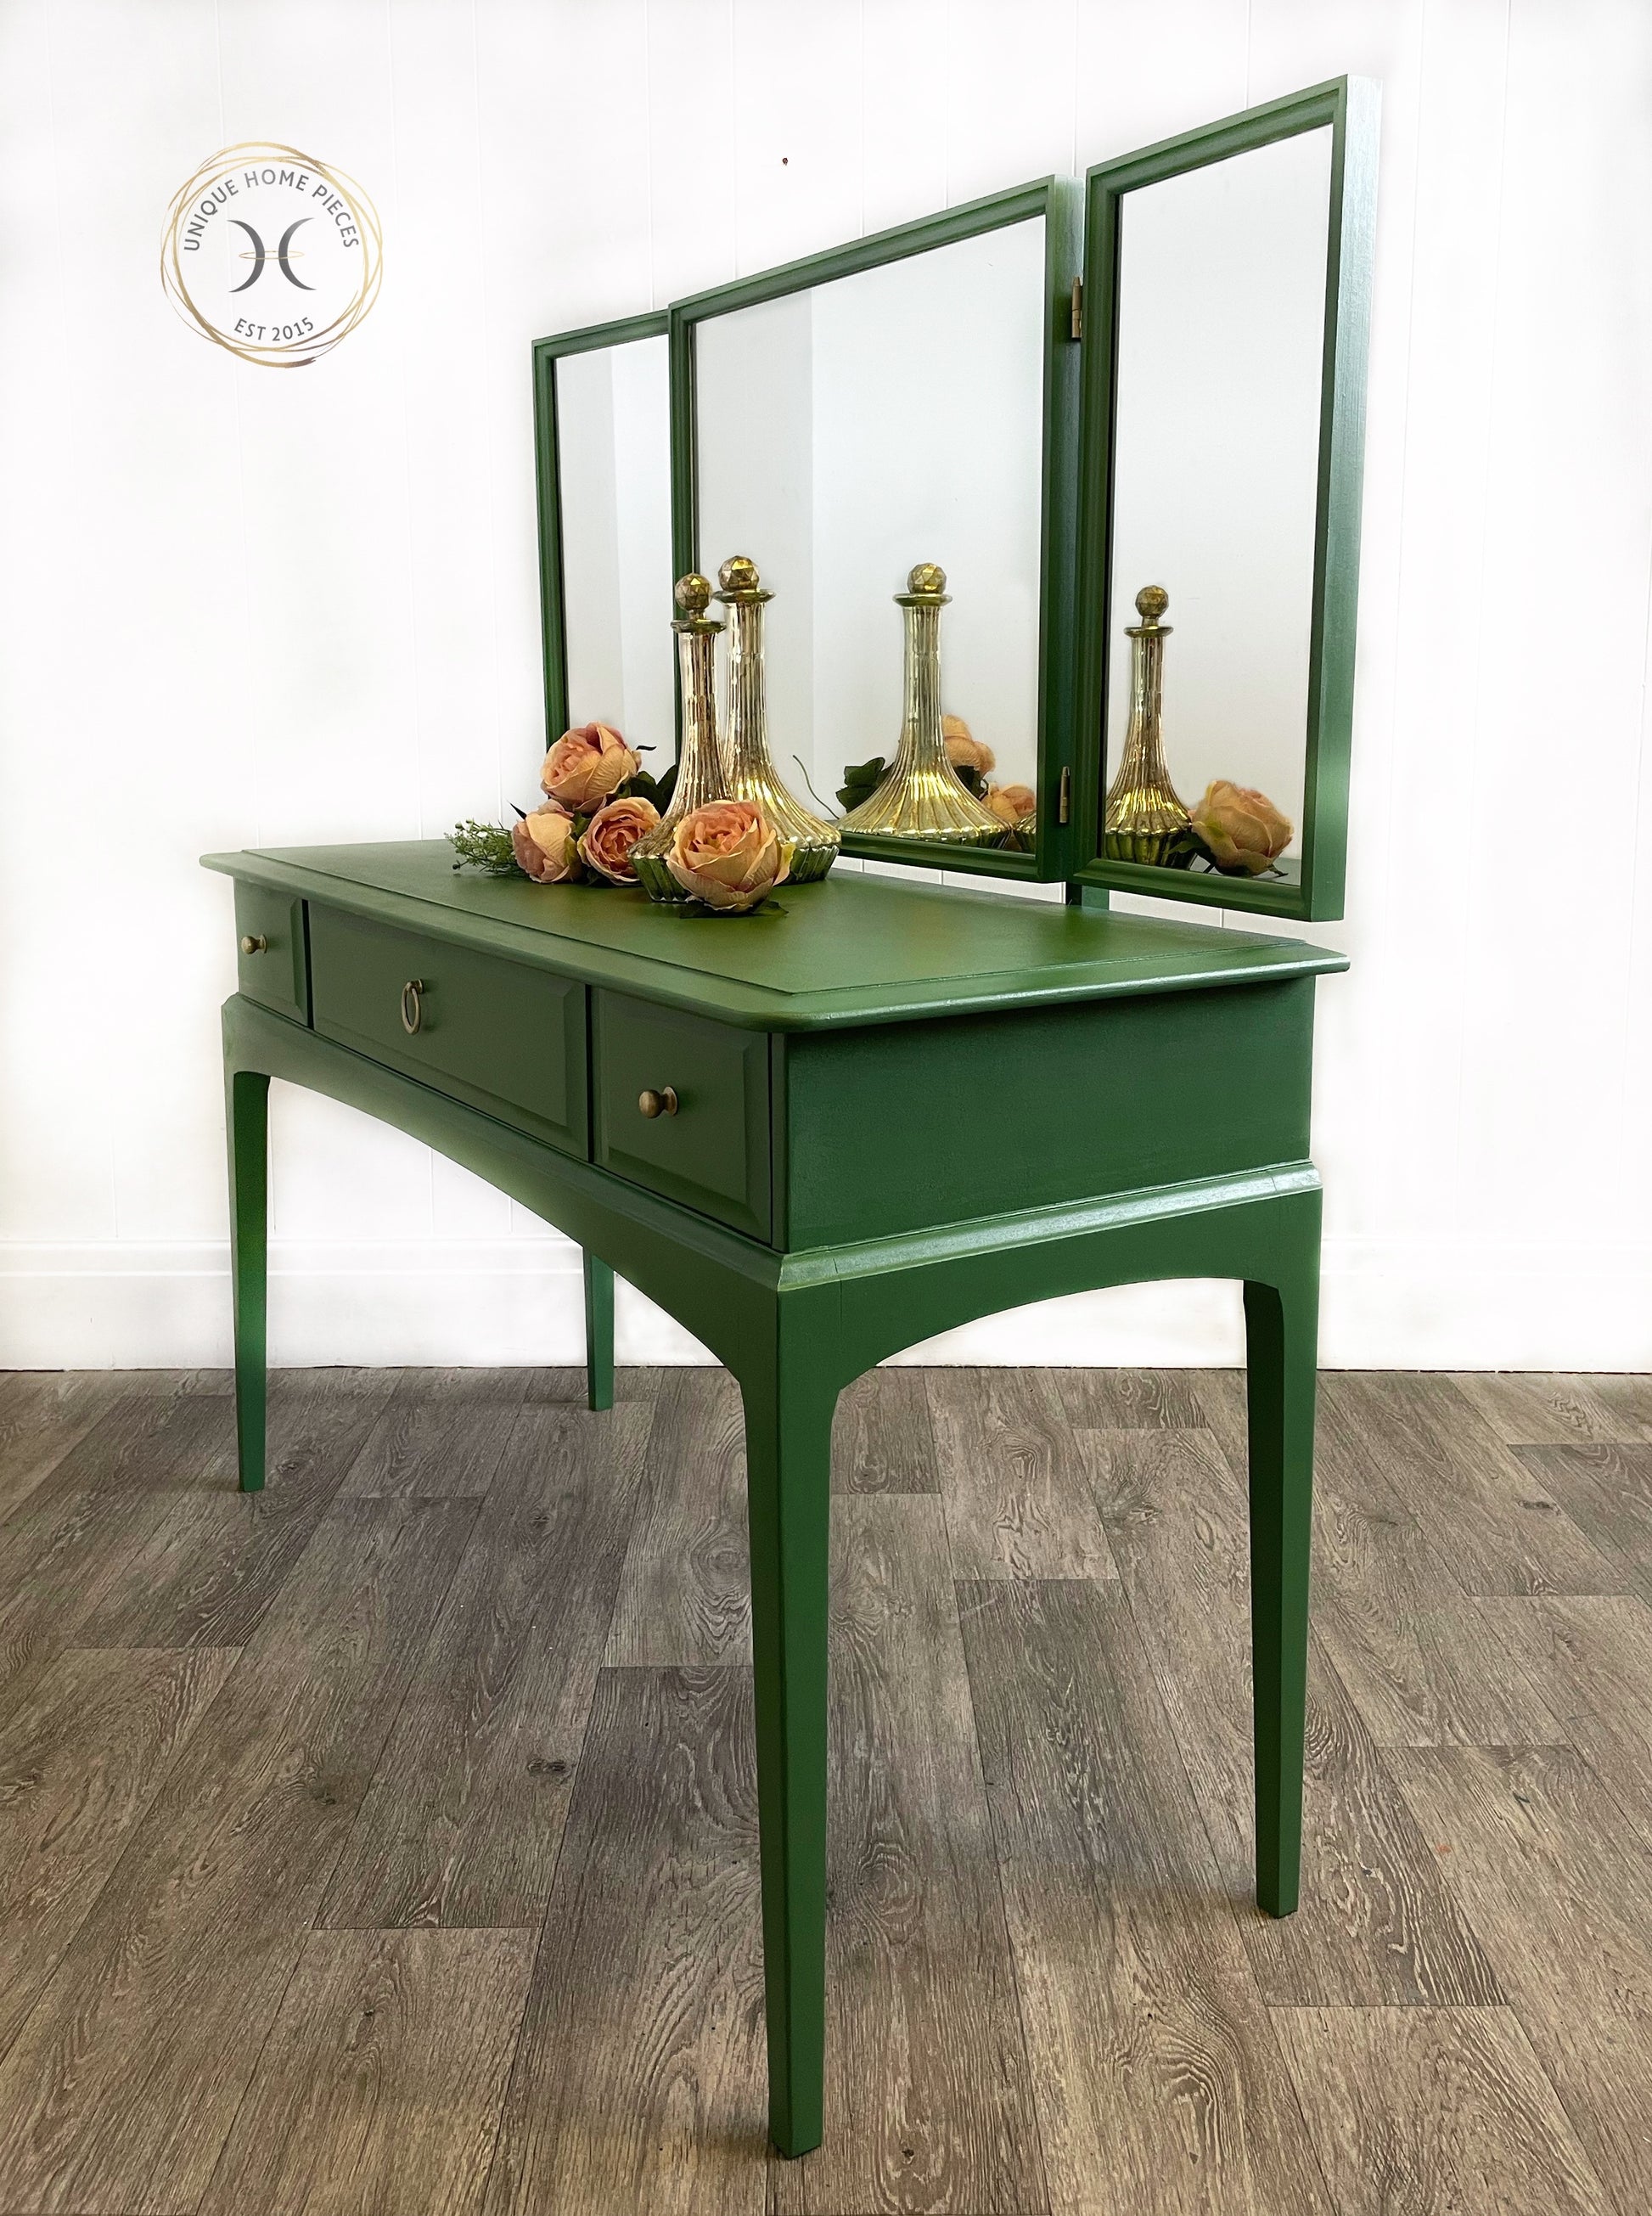 Sold Stag Vintage 3 Mirrored Green Dressing Table, 3 Drawer Dressing Table - Unique Home Pieces